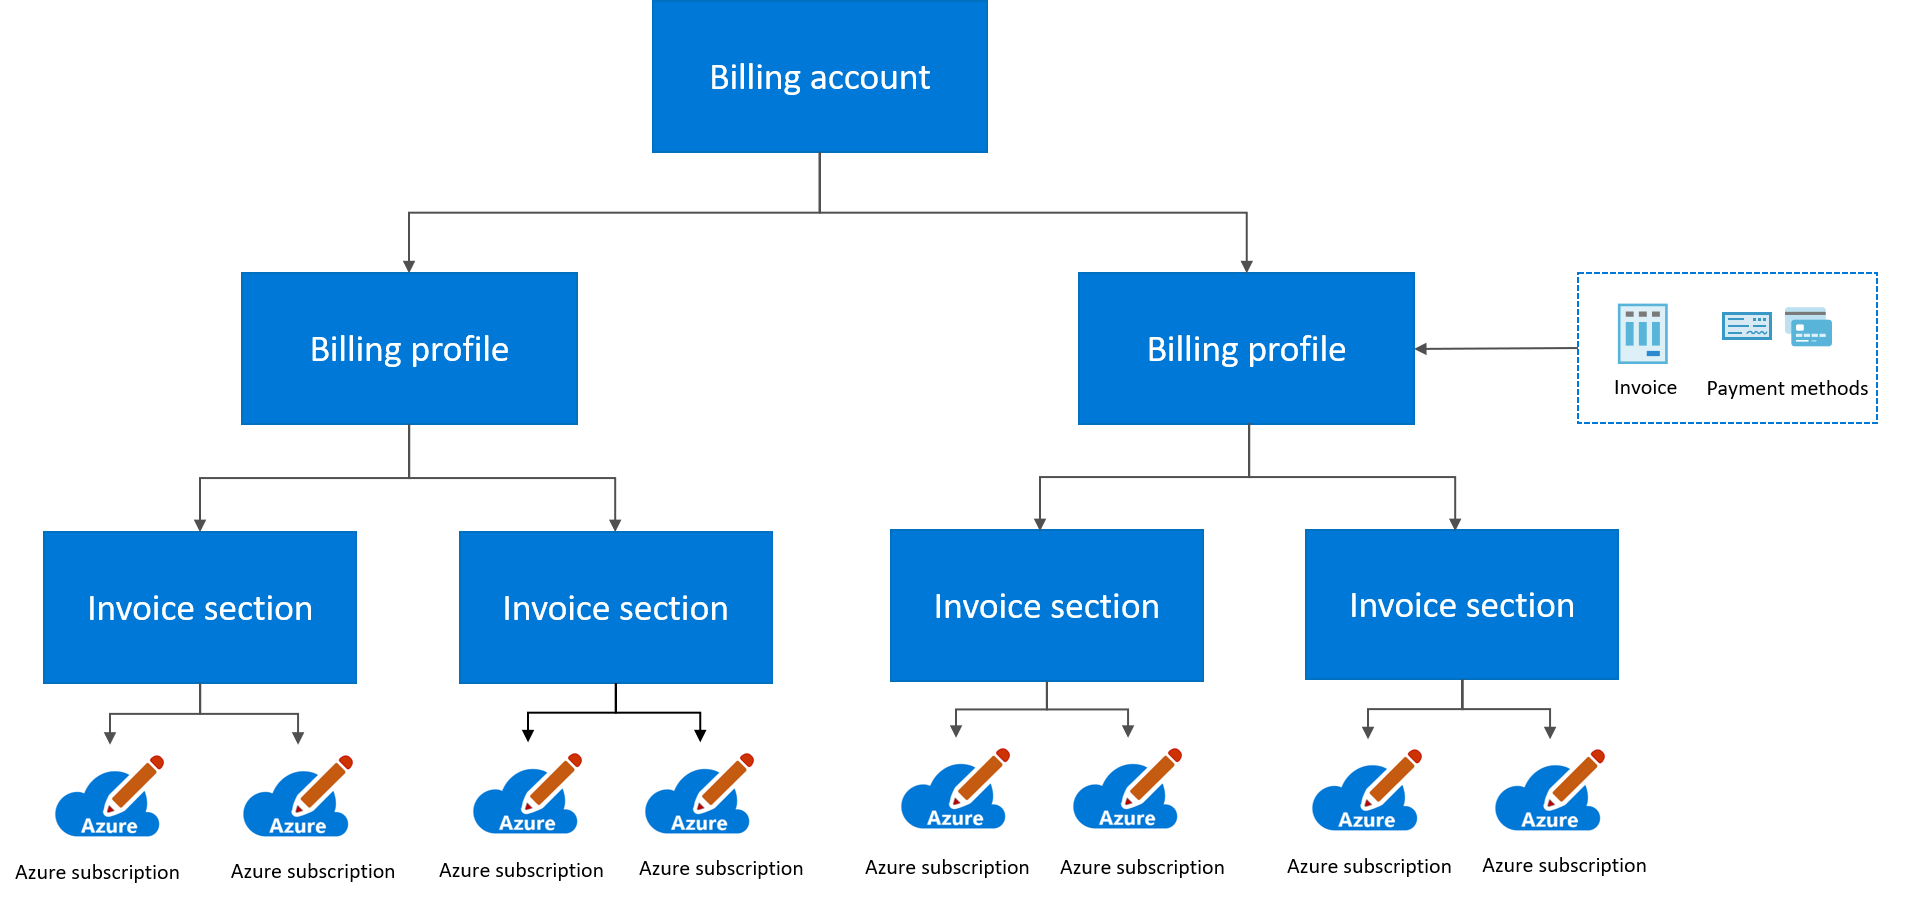 Diagram showing the Microsoft Customer Agreement billing hierarchy.